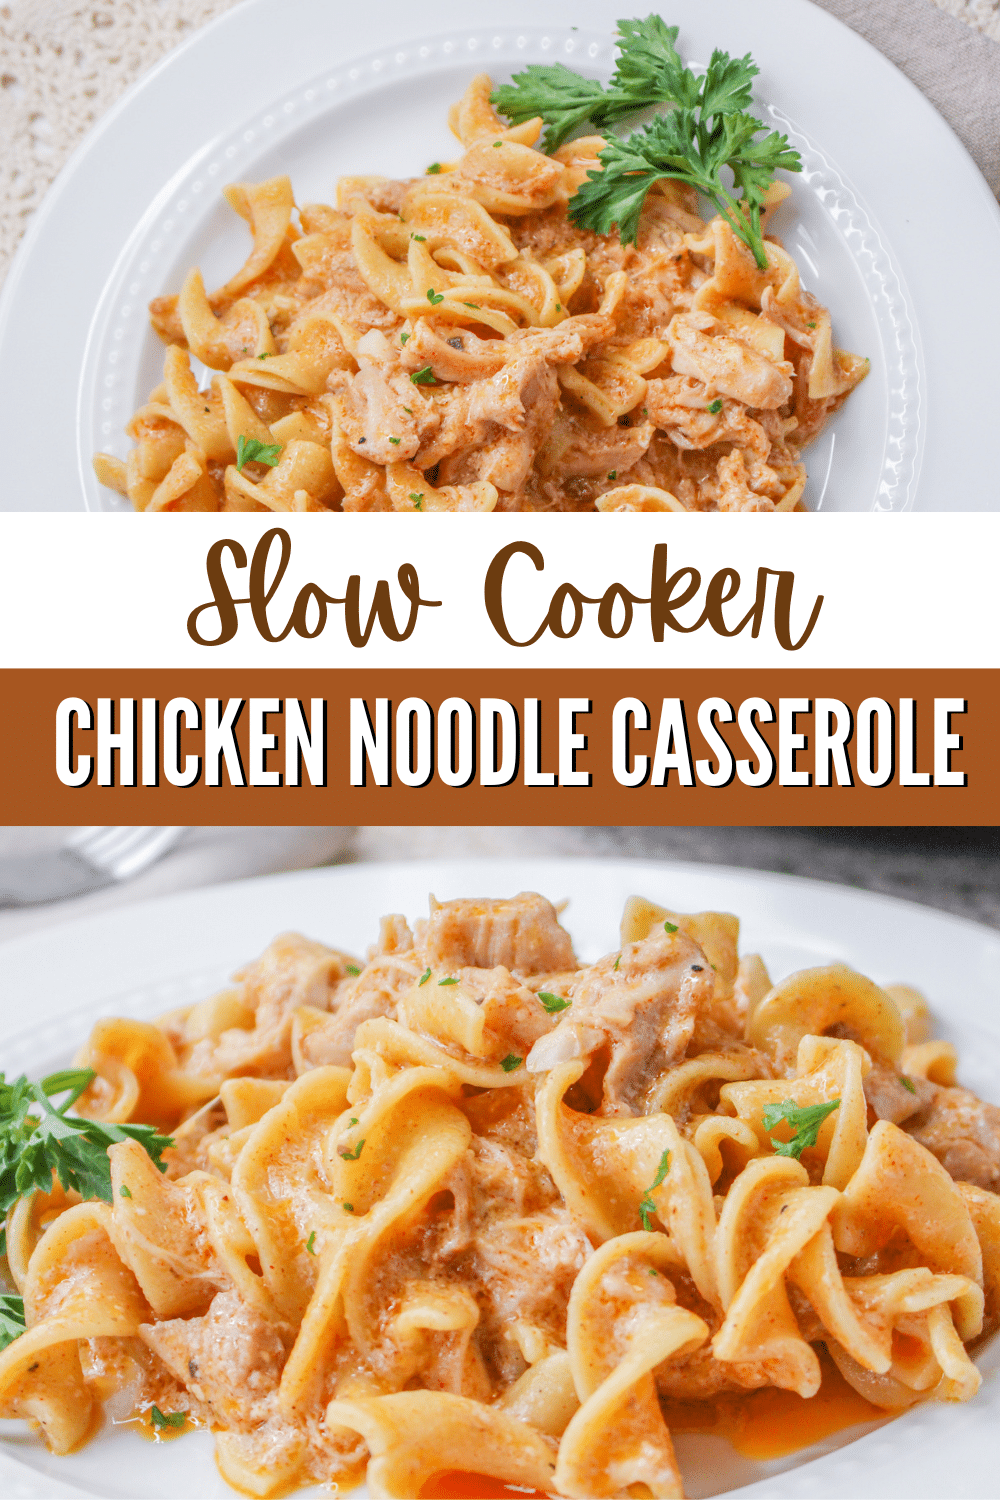 Simplify your next dinner without sacrificing taste with this warm and delicious Chicken Noodle Crockpot Casserole. #chickennoodlecrockpotcasserole #slowcookerchicken #chickennoodle #chickenandnoodlesrecipe #creamychicken via @wondermomwannab